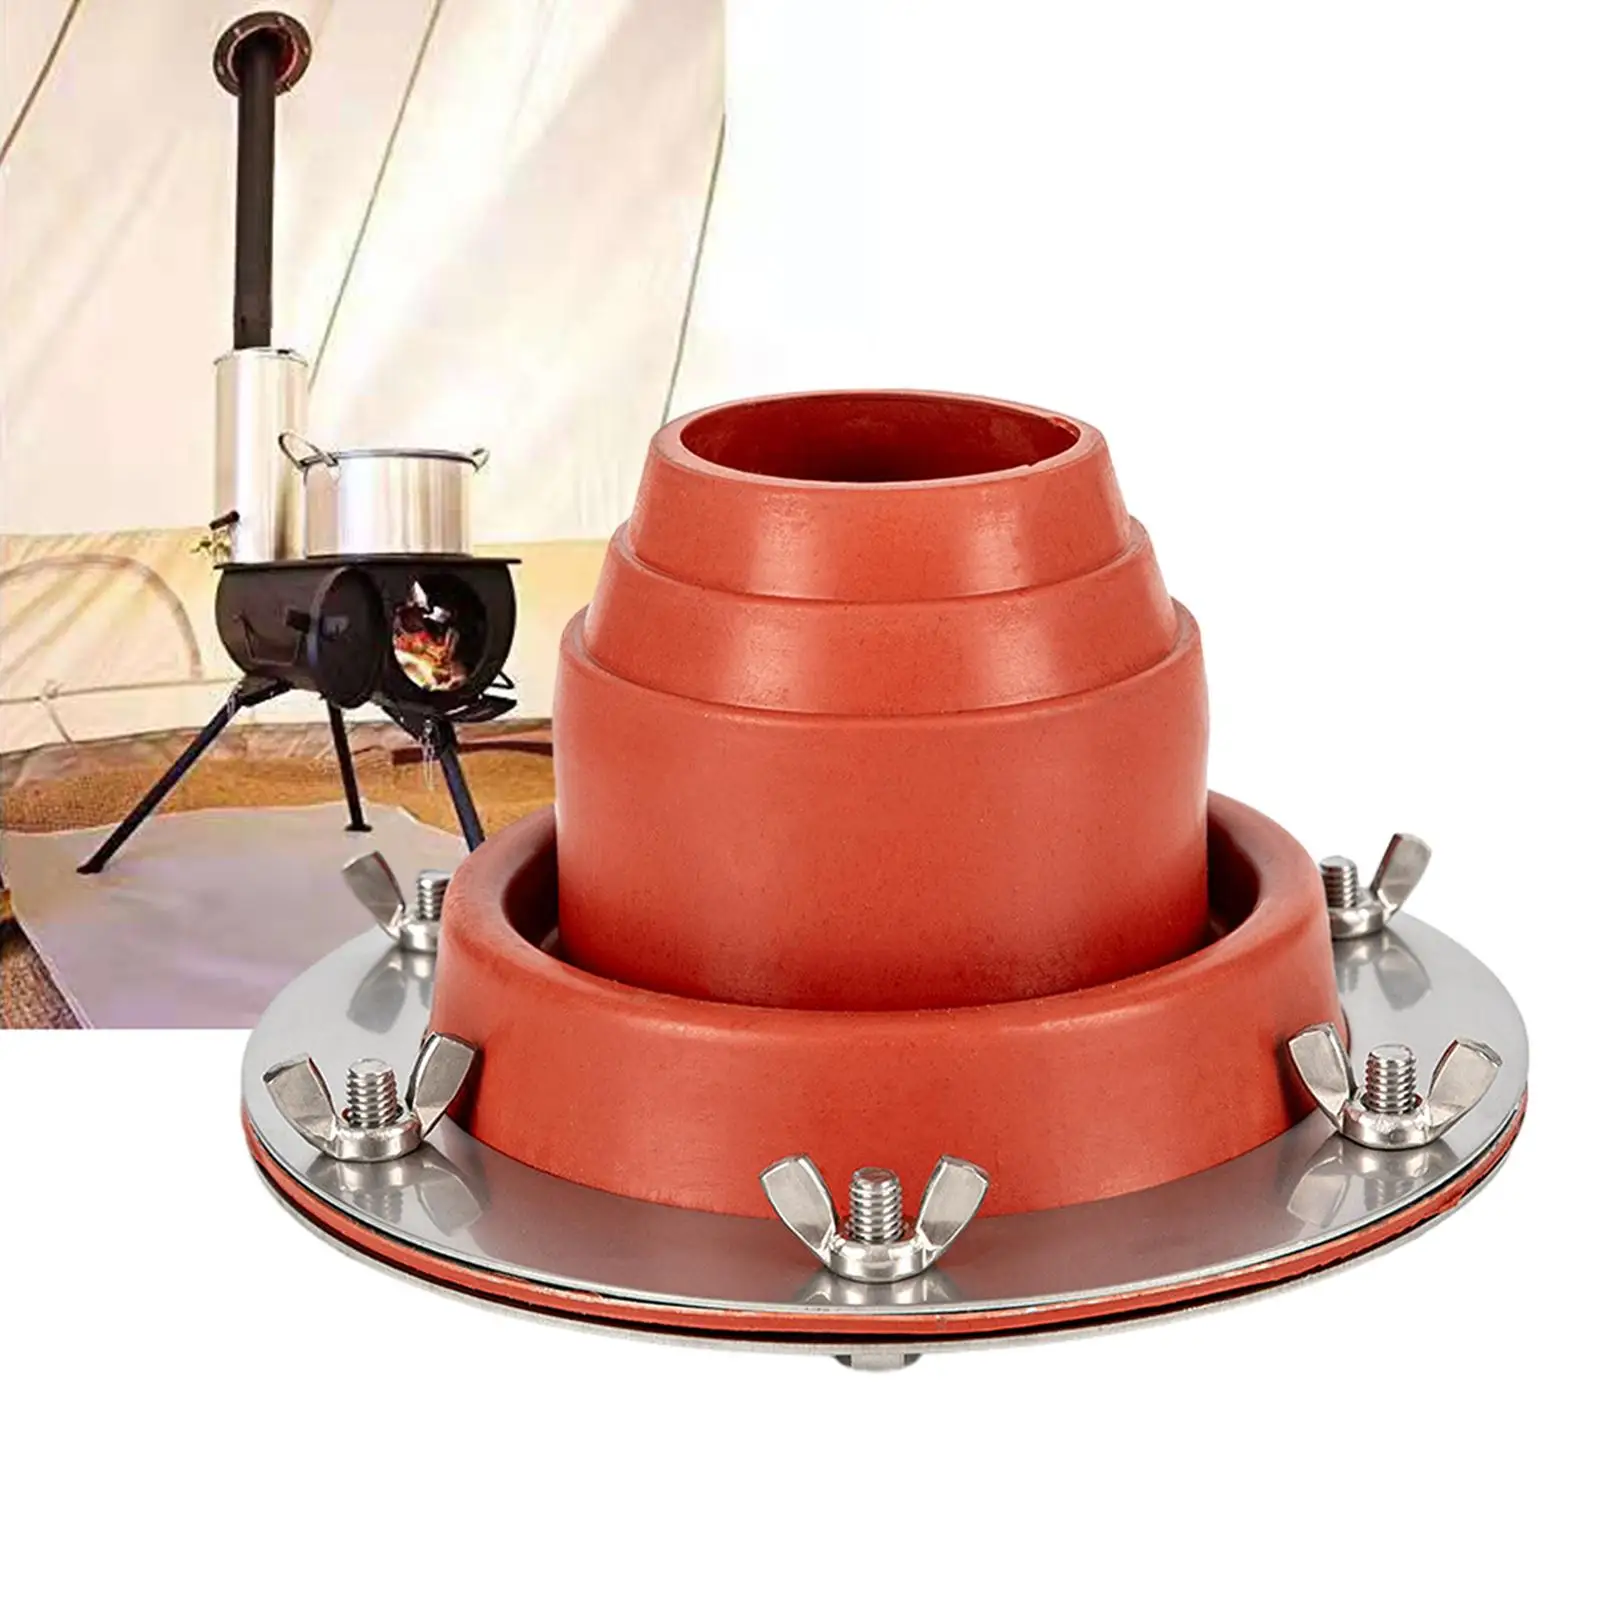 Silicone Tent Stove Jack Chimney Cover Outdoor Camping Silicone Fire Resistant Fireproof Protection Ring for Tent Backpacking